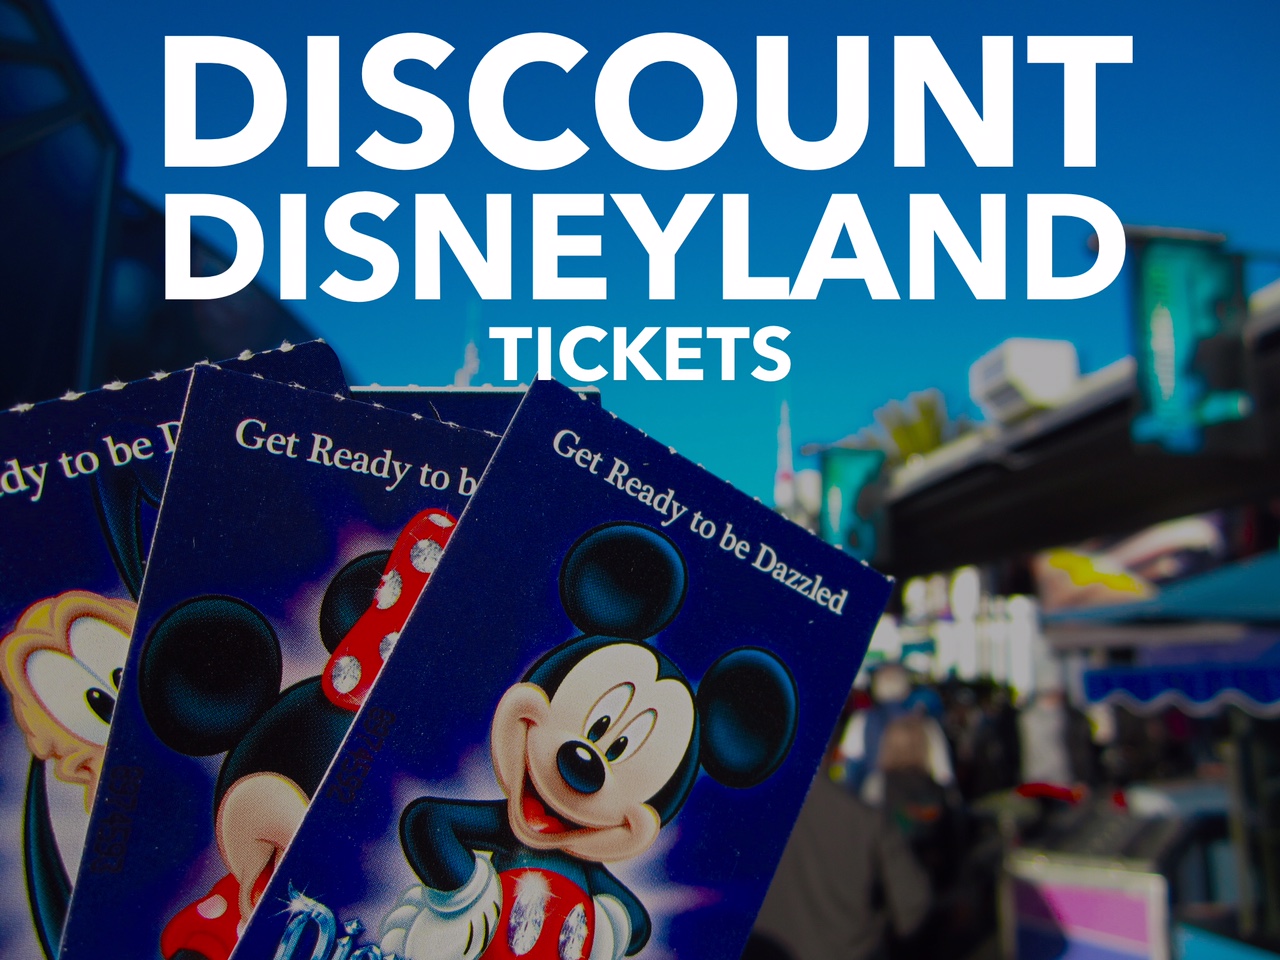 Score Big Savings on Disneyland Tickets at Costco Limited Time Offer